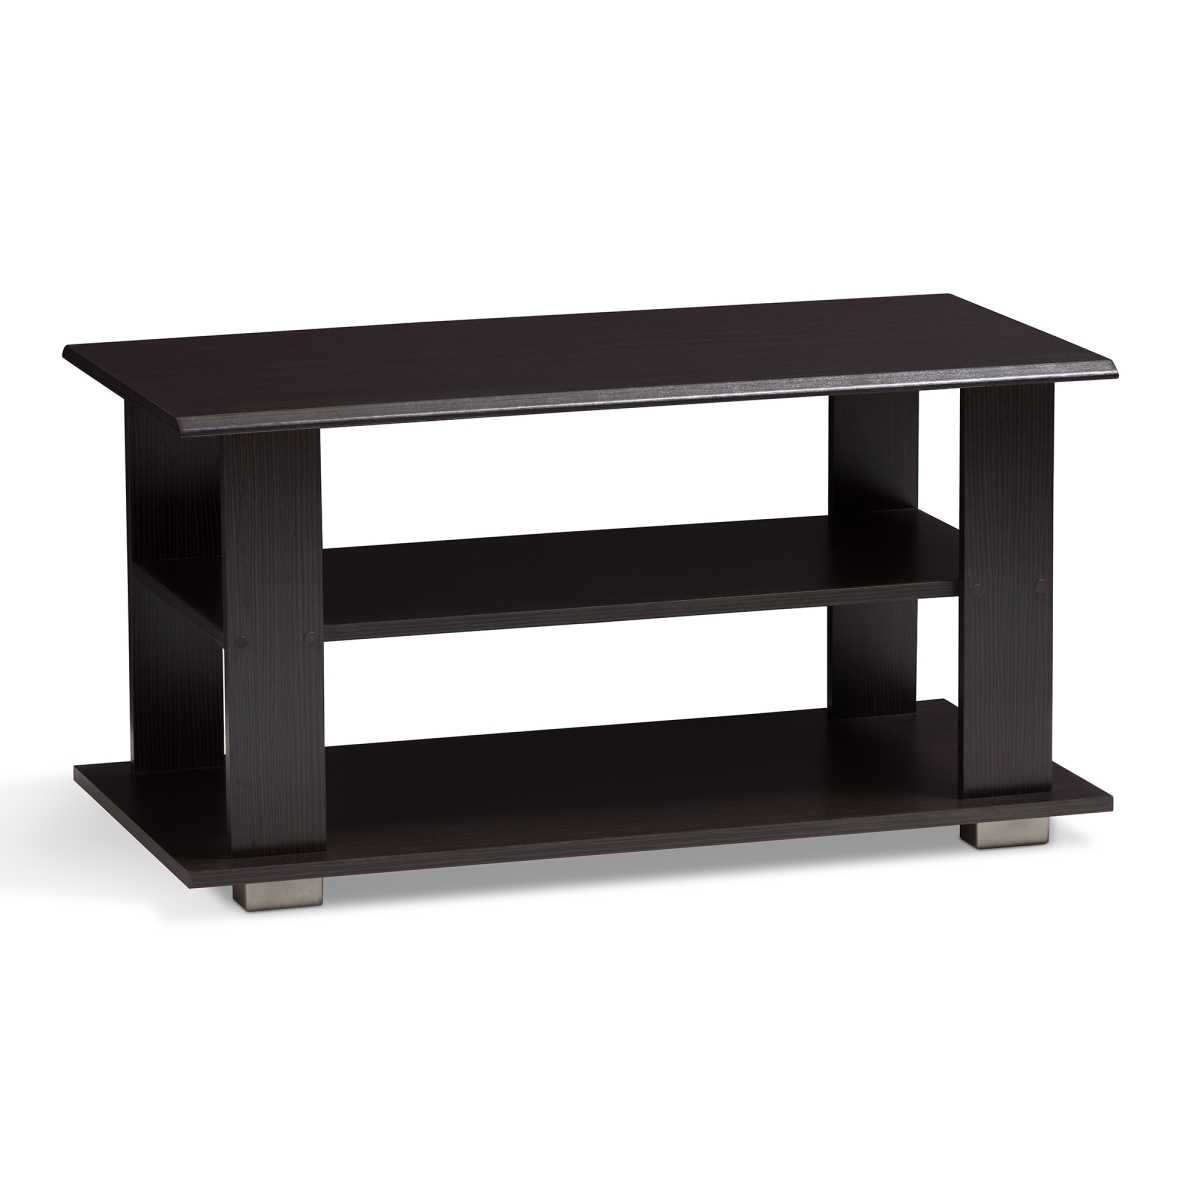 Urban Designs 370168 Mikayla Wooden Coffee Table, Wenge Brown - 18.31 X 35.43 X 17.52 In.